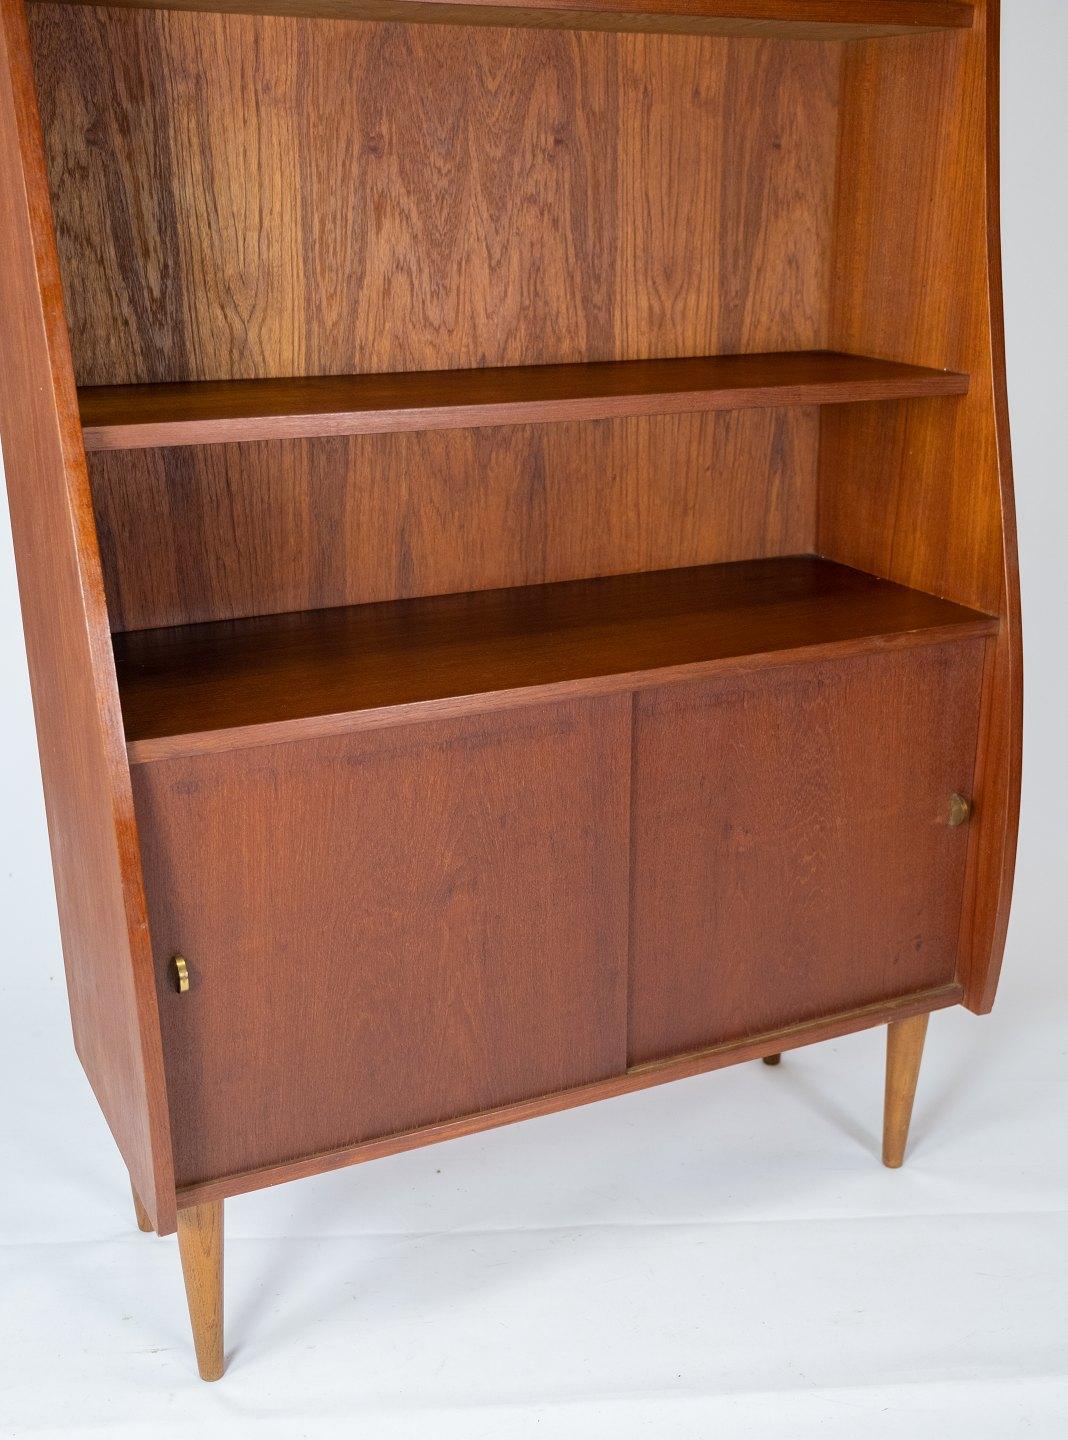 Get a piece of Danish design history with this beautiful teak bookcase from the 1960s.

This bookcase represents the timeless elegance and functionality that characterizes Danish furniture design from this era. The teak wood adds warmth and